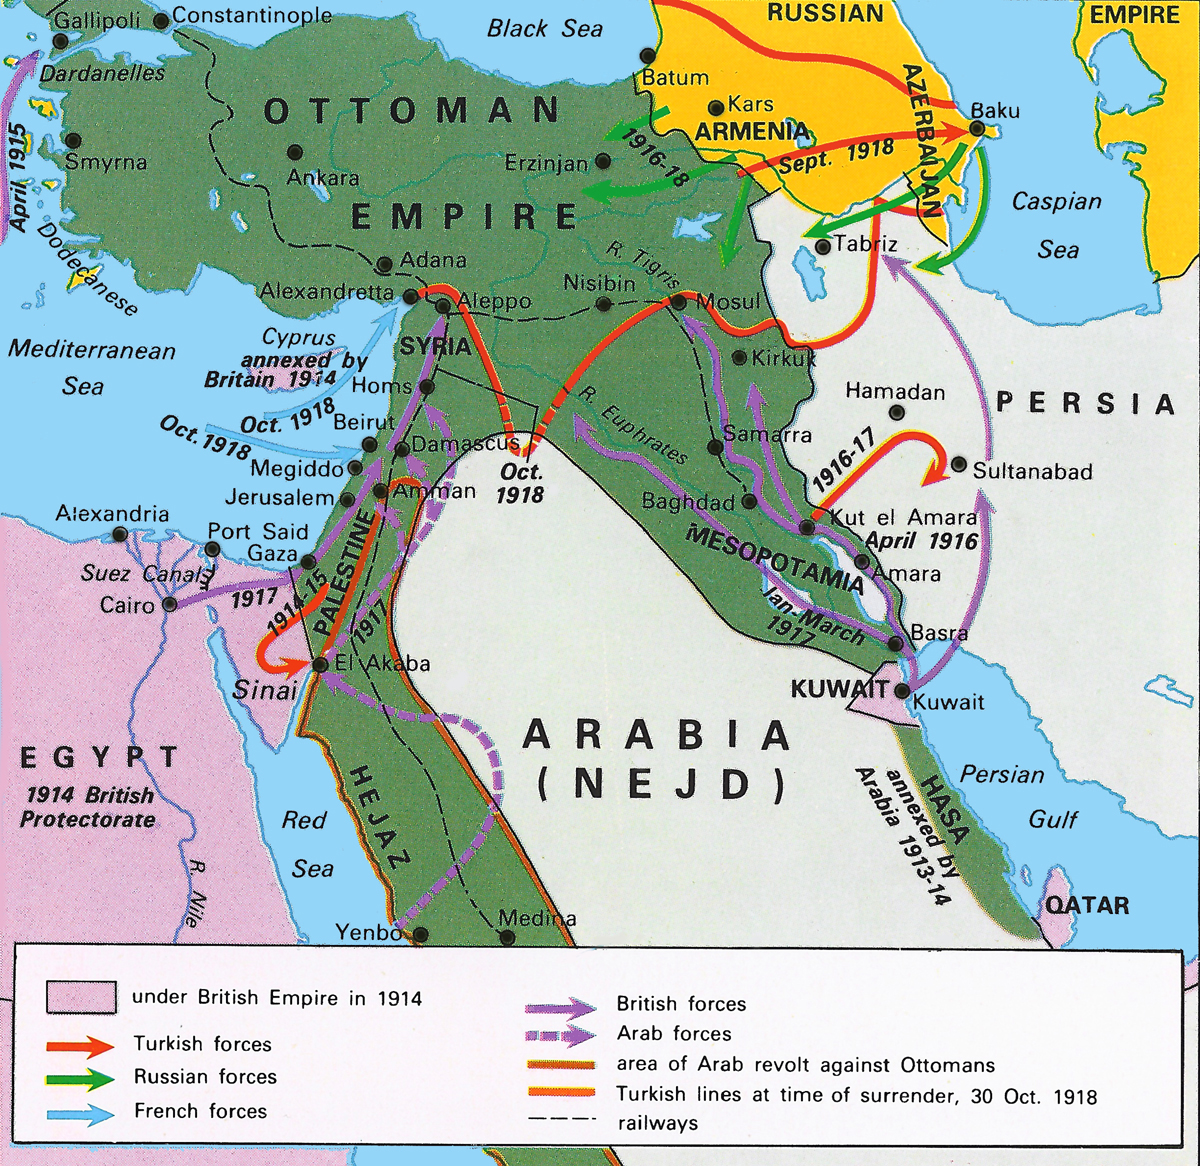 Map of the Ottoman Empire during World War I